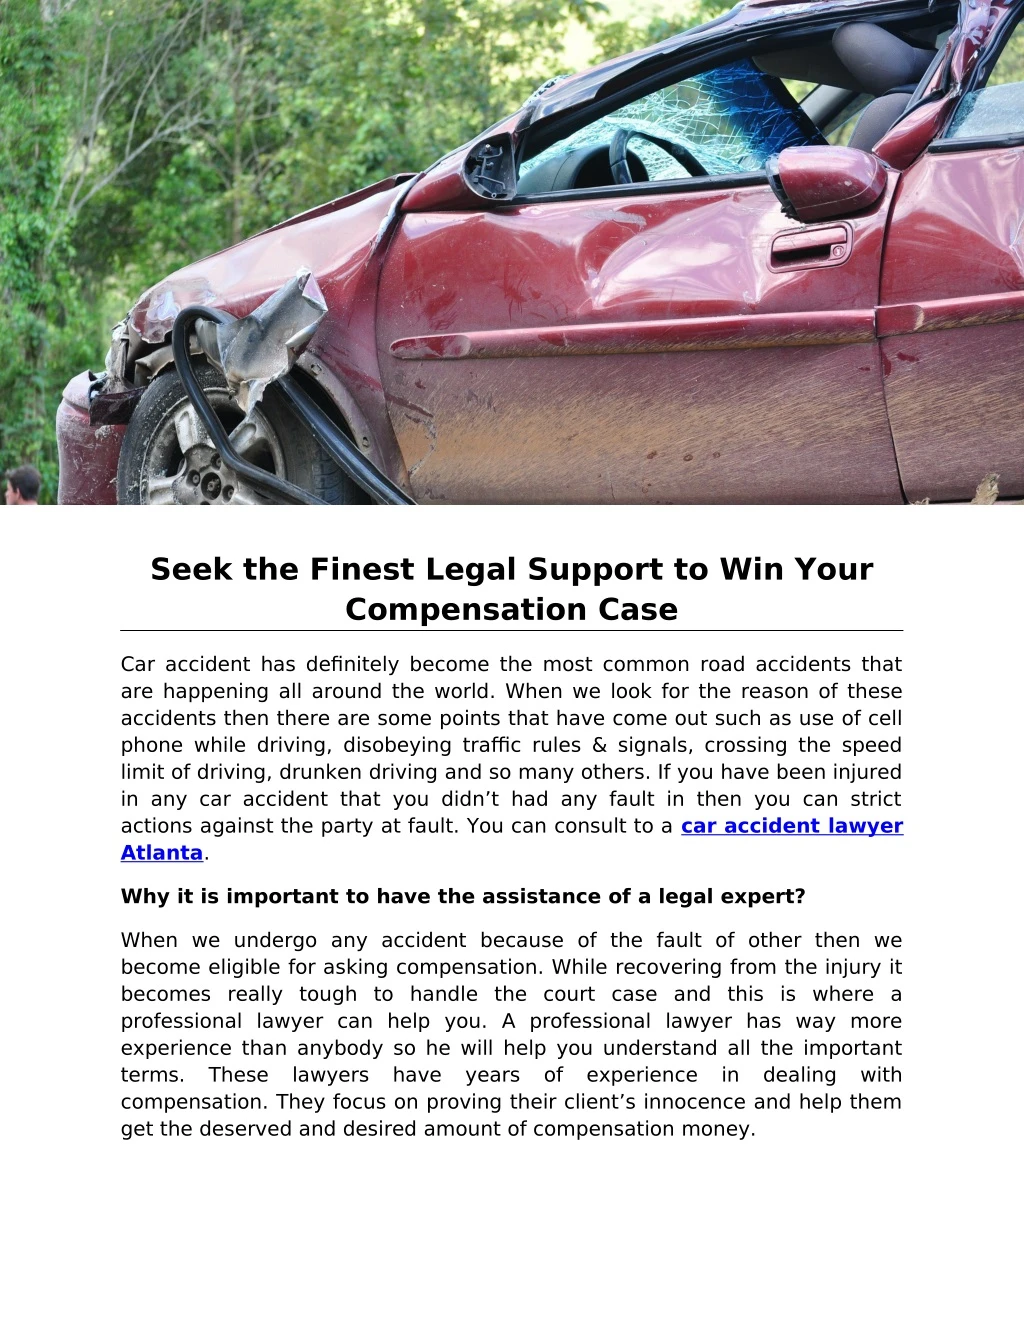 seek the finest legal support to win your